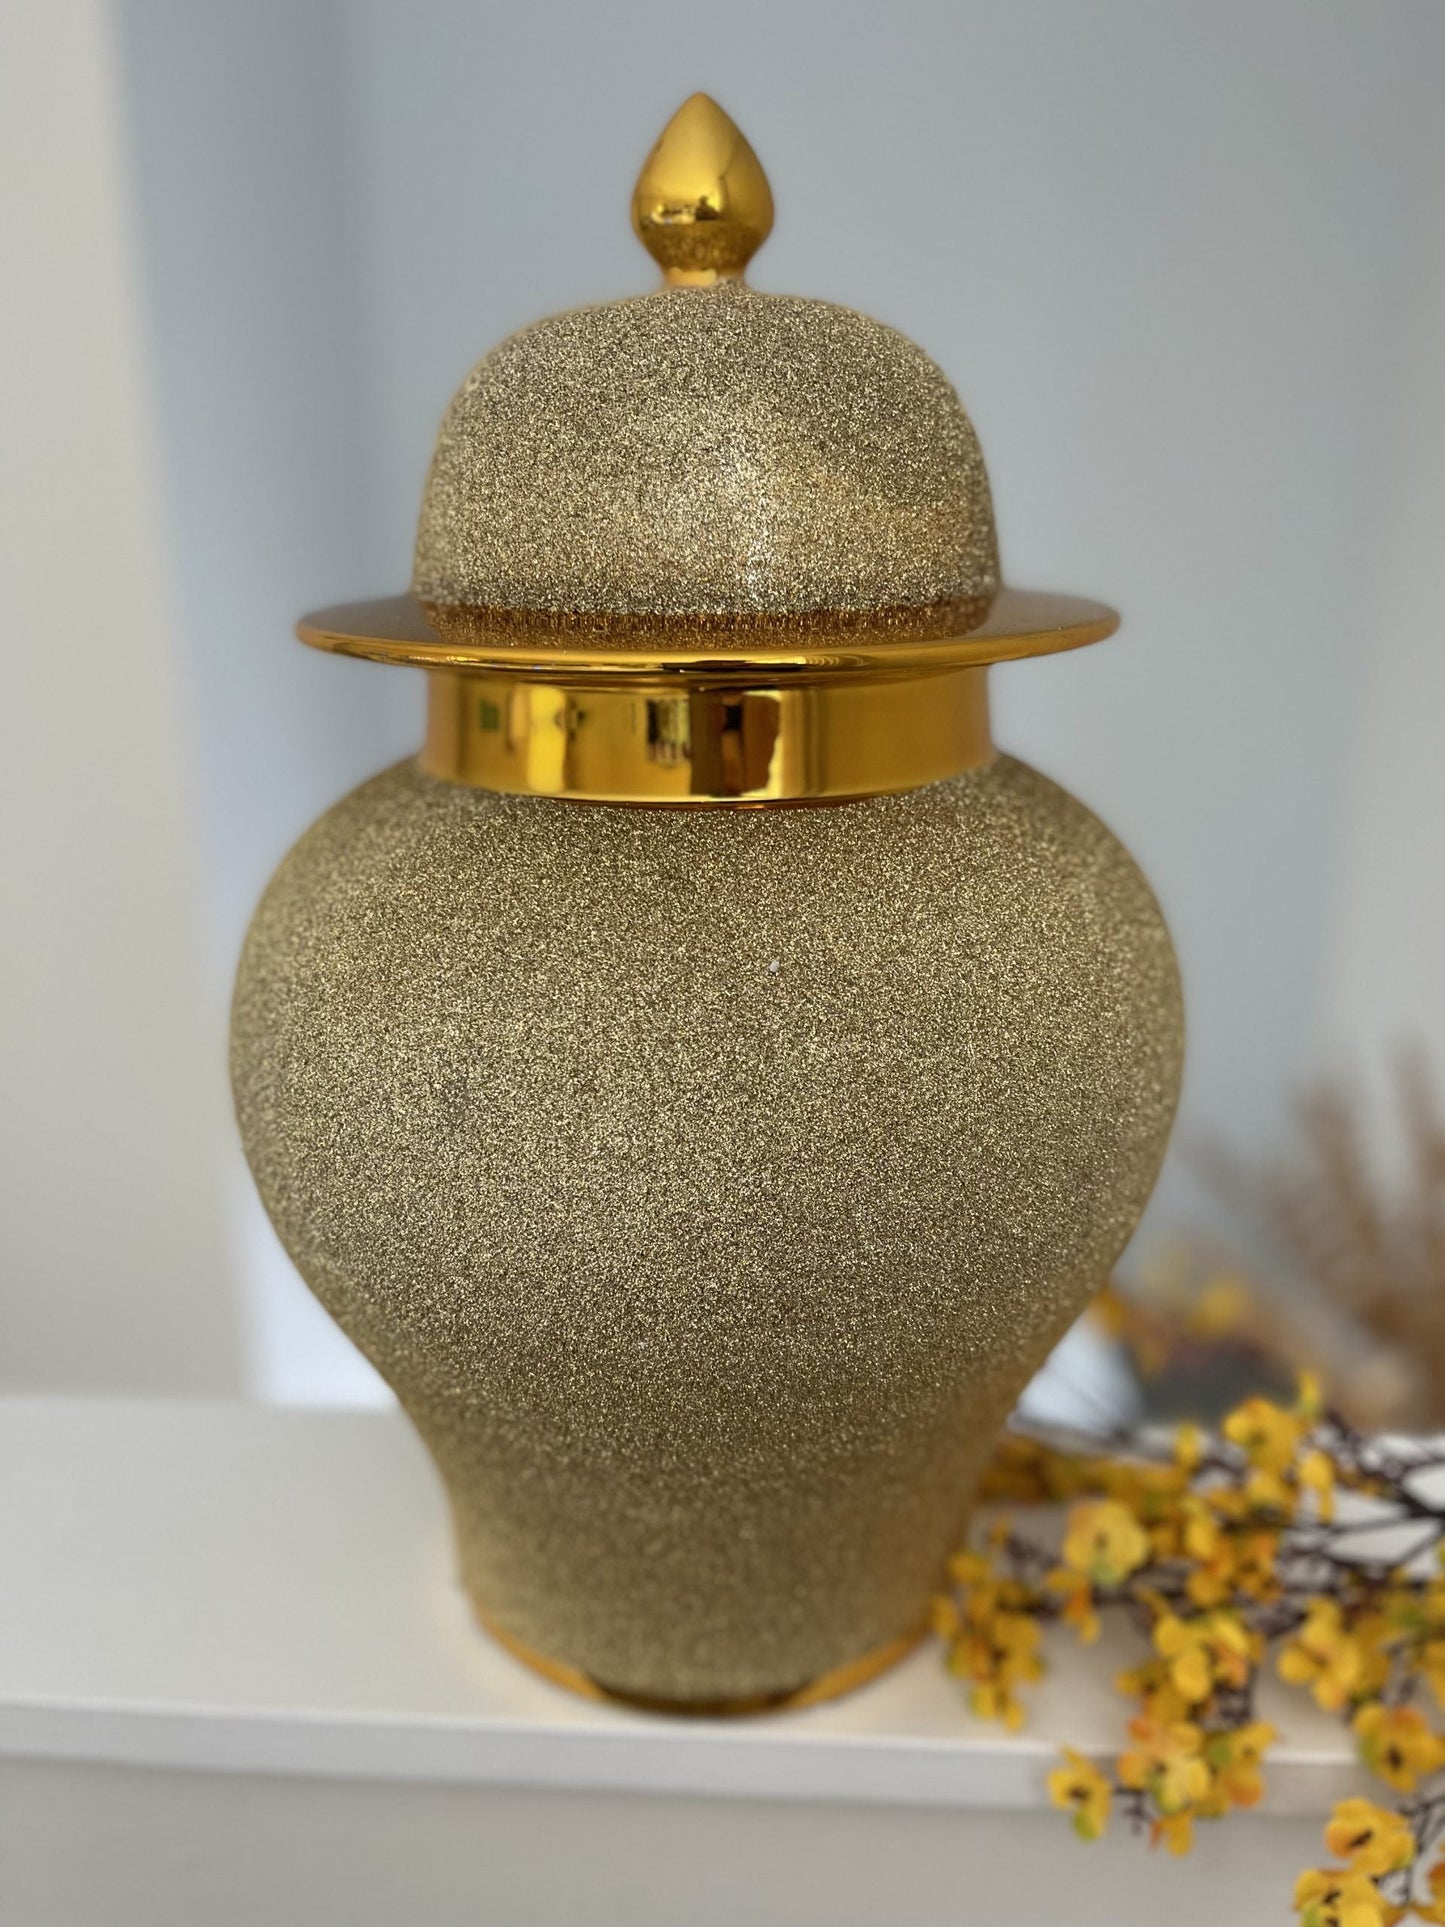 Frosted Gold Ginger Jar 15” - Glitzy Glam Home Decor